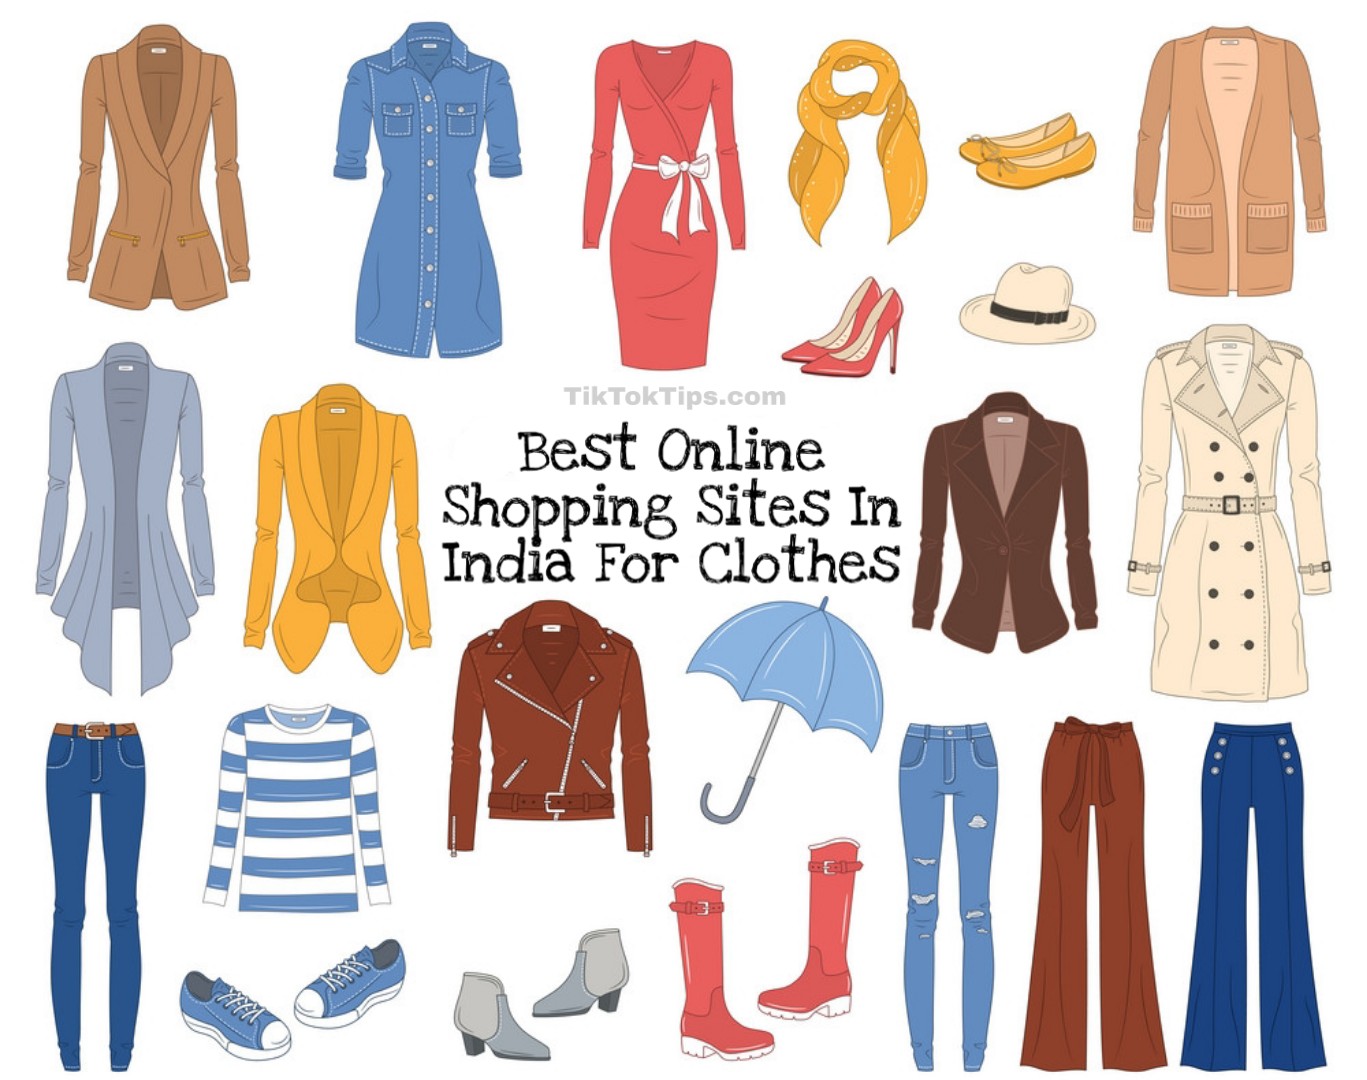 30 Best Photos Best Online Shopping Apps In India For Clothes / 25 Best Shopping Apps in India for Good Online Shopping ...